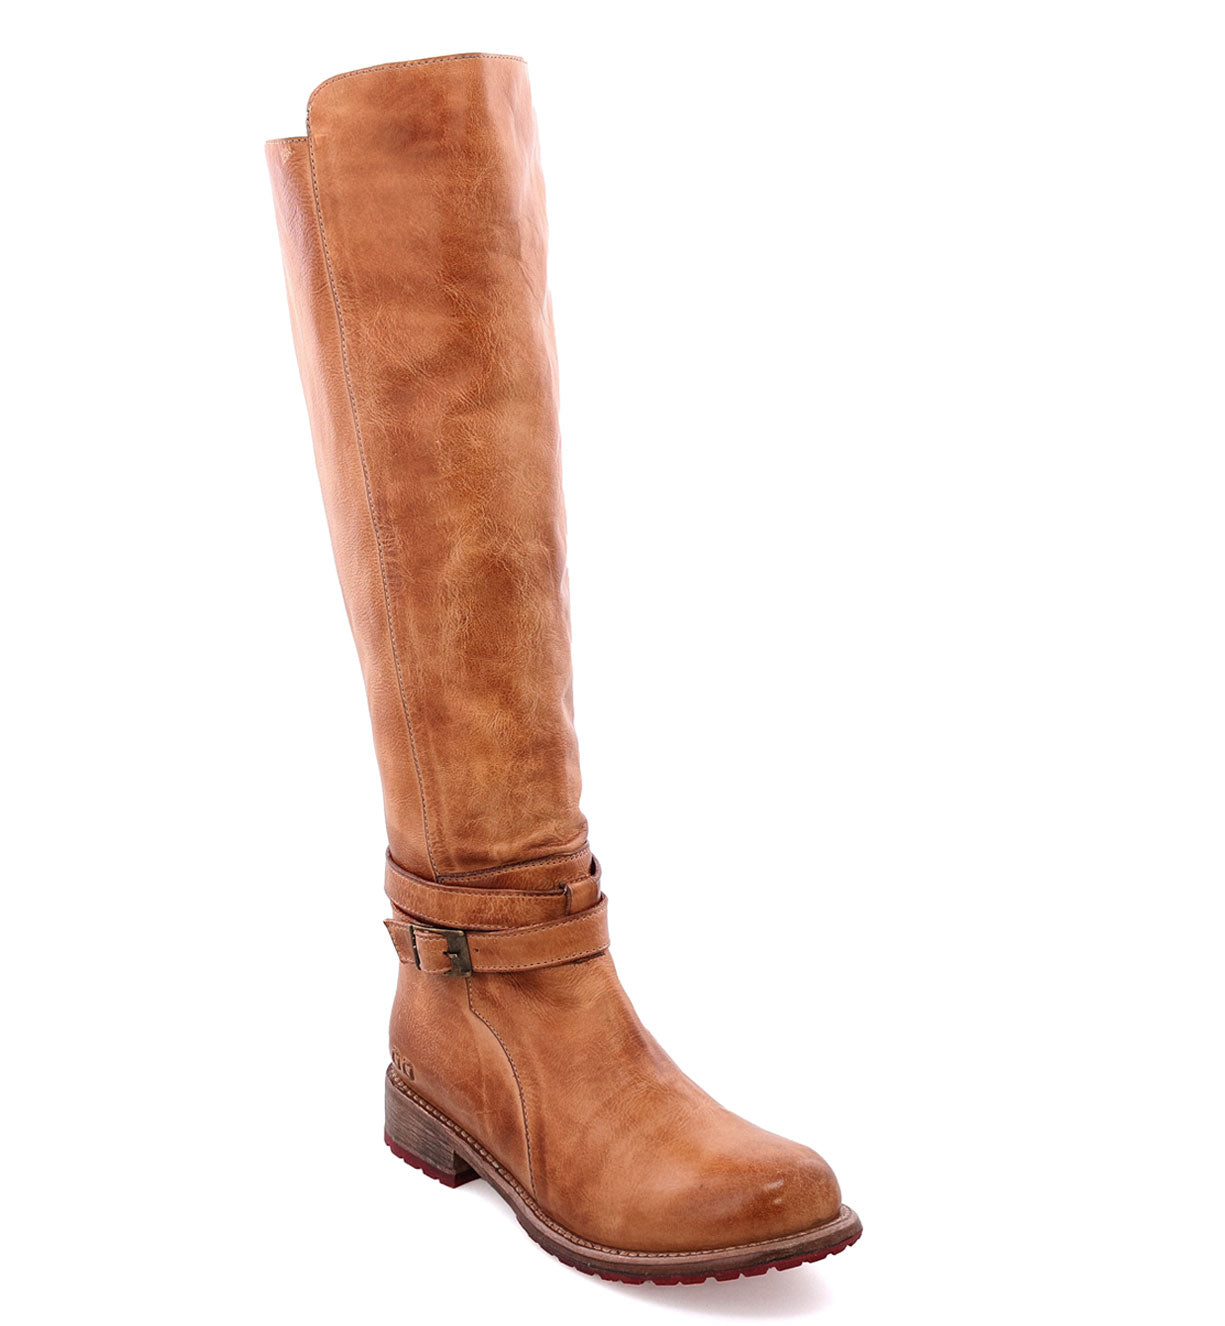 A women's Bed Stu Bristol tan leather riding boot.